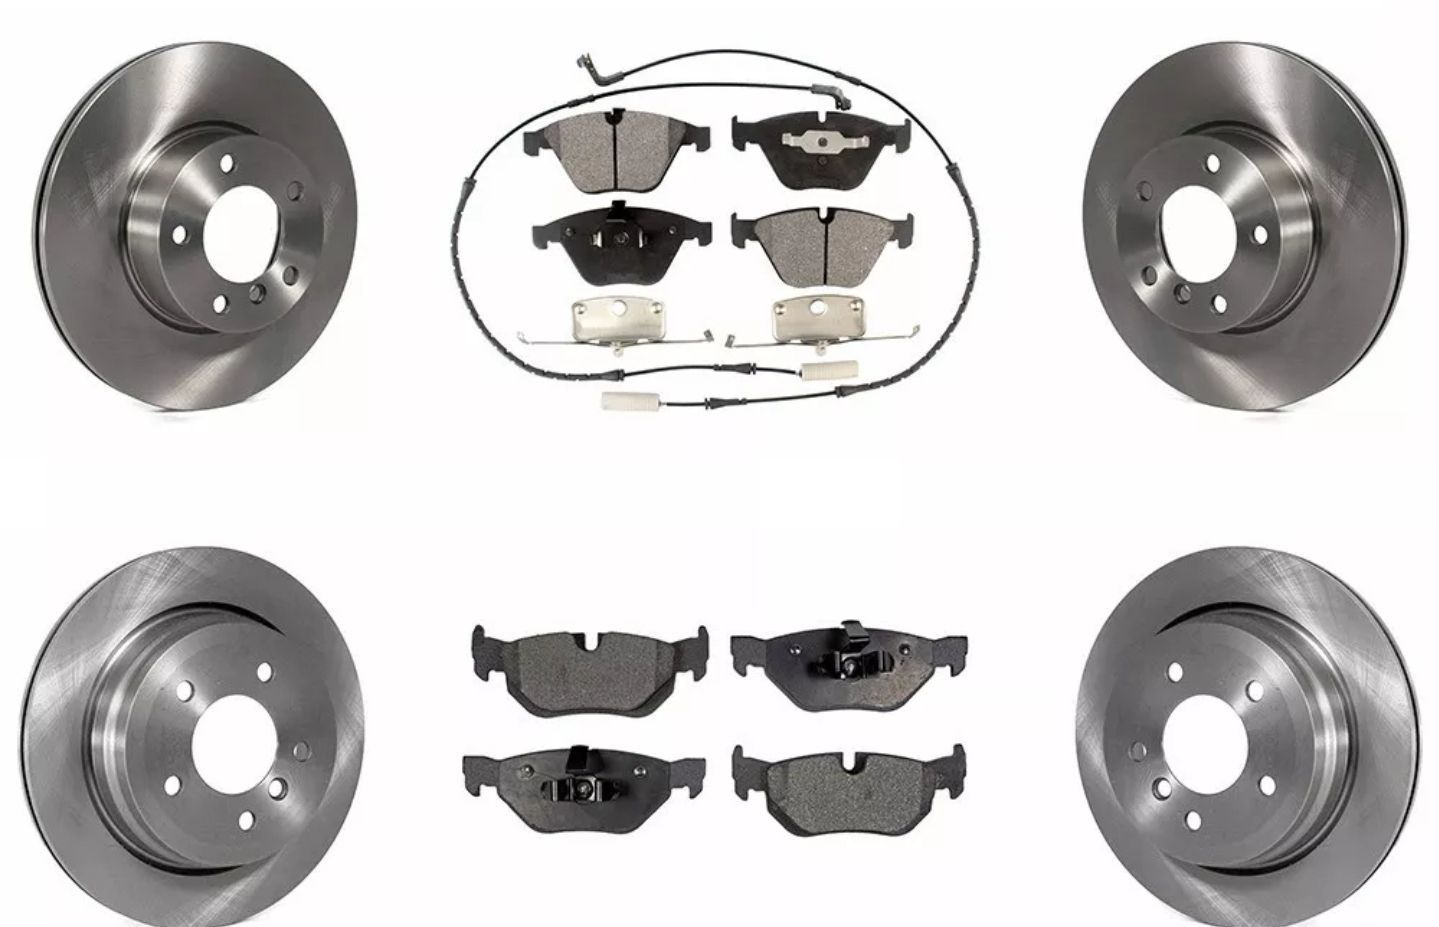 Vw Jetta 2.5L Brake Kit Package Front and Rear E-Coated Rotors Front  (288mm)and Rear (253mm) and Ceramic Brake Pad Set 2007 2008 2009 2010 2011  2012 2013 2014 2015 2016 - Get Your Parts - OEM Parts & Performance